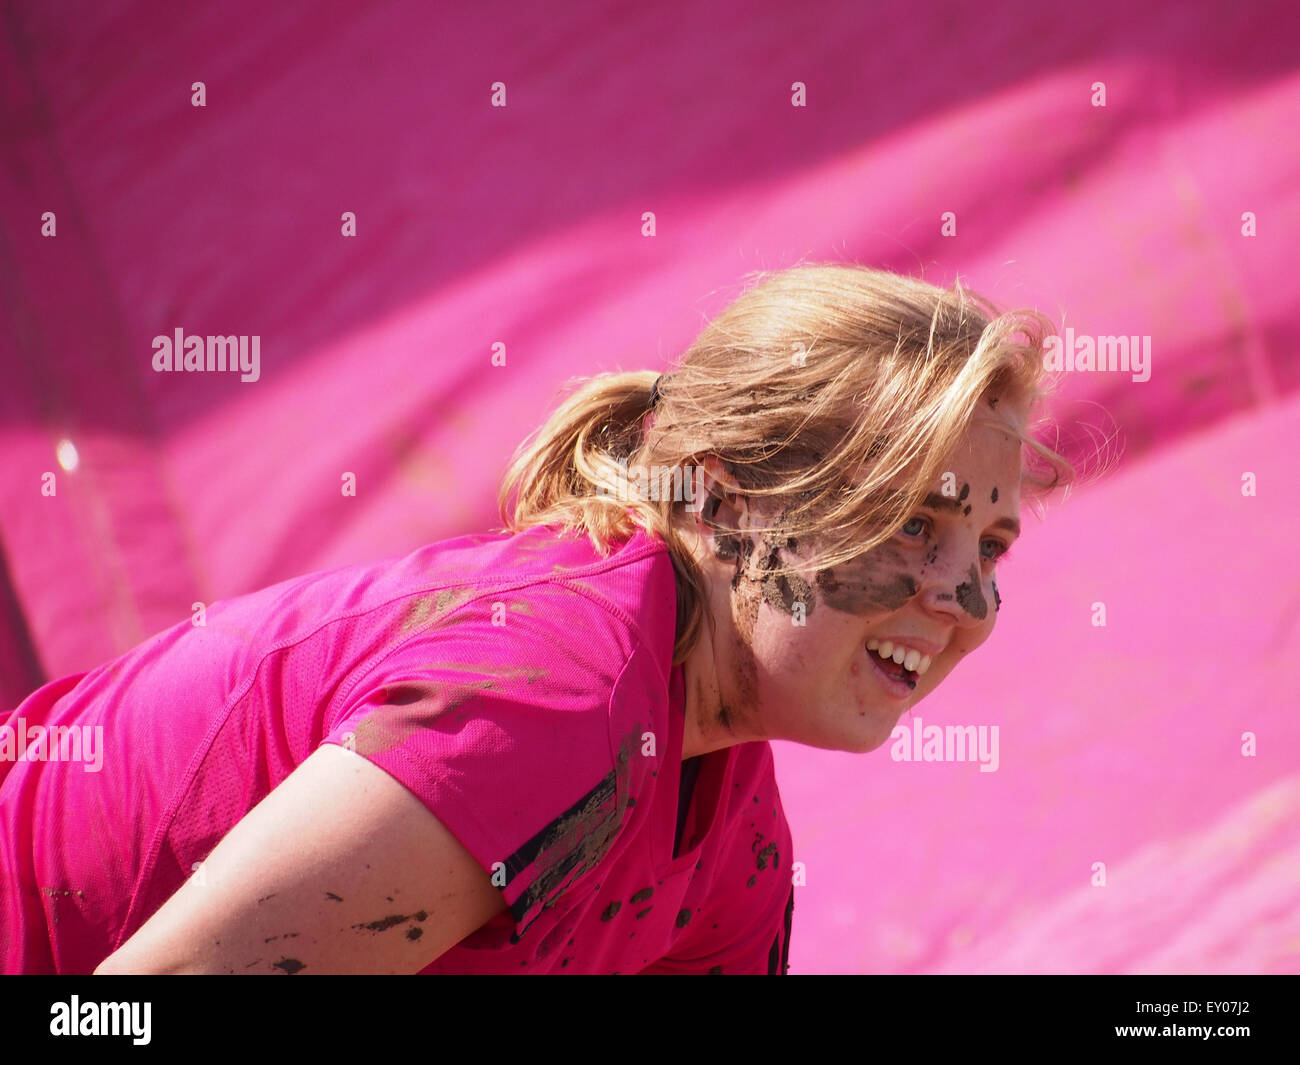 Portsmouth, UK. 18th July, 2015. A participant in the Race For Life - Pretty muddy has mud smeared across her face. The Race for Life Pretty Muddy event is open to females only and consists of a 5K mud covered obstacle course Credit:  simon evans/Alamy Live News Stock Photo